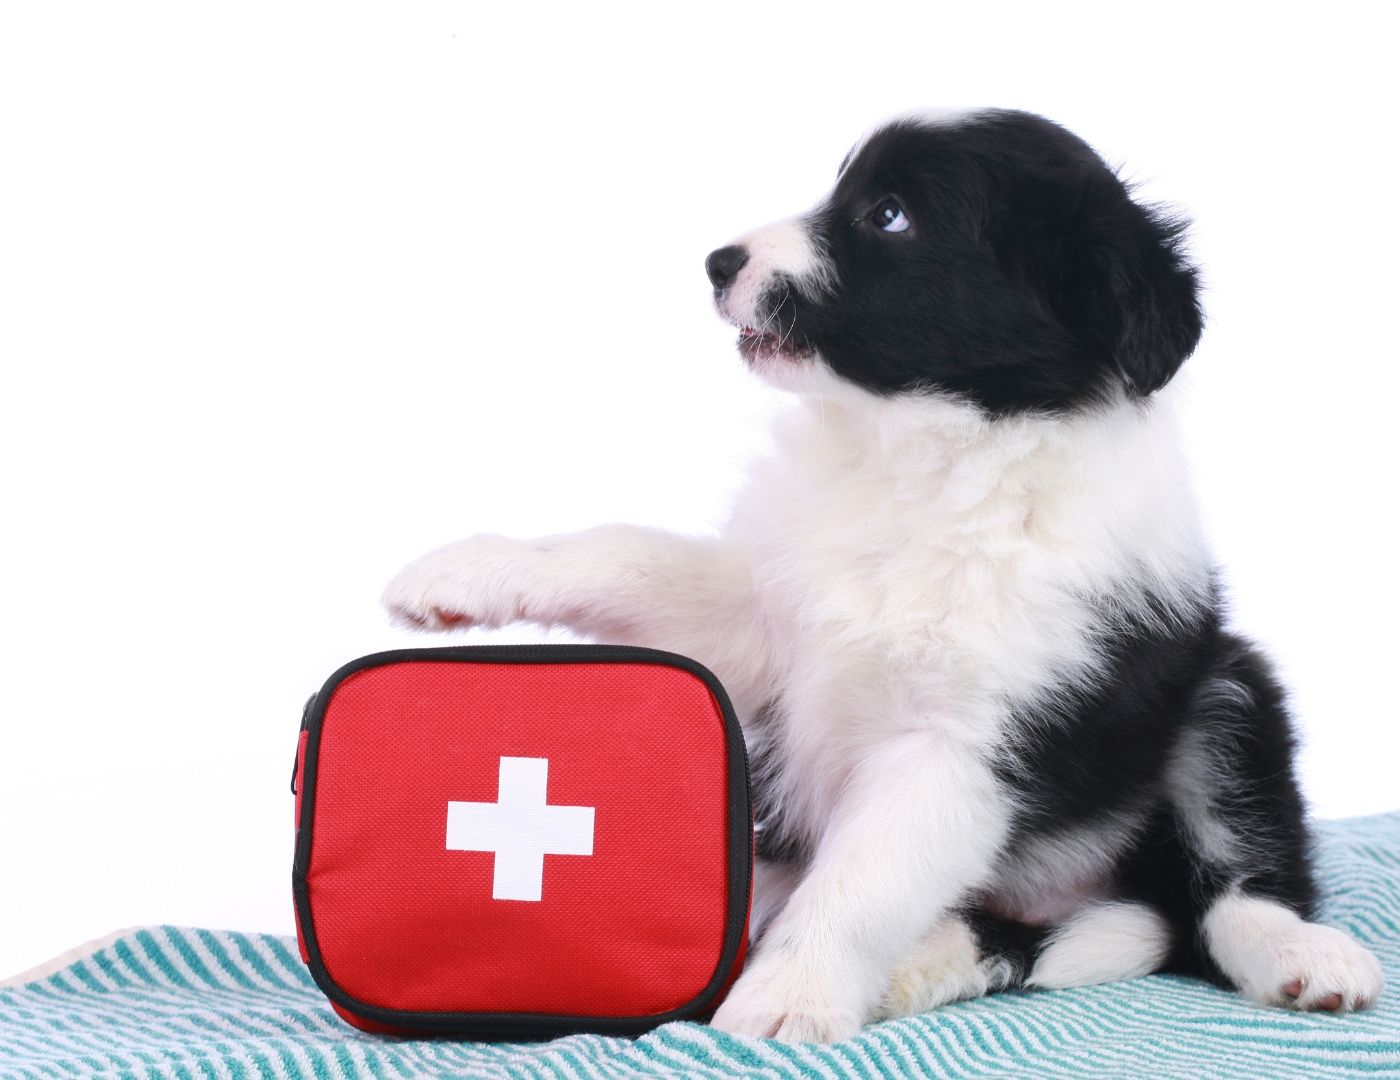 What you need to know about the best dog first aid kits